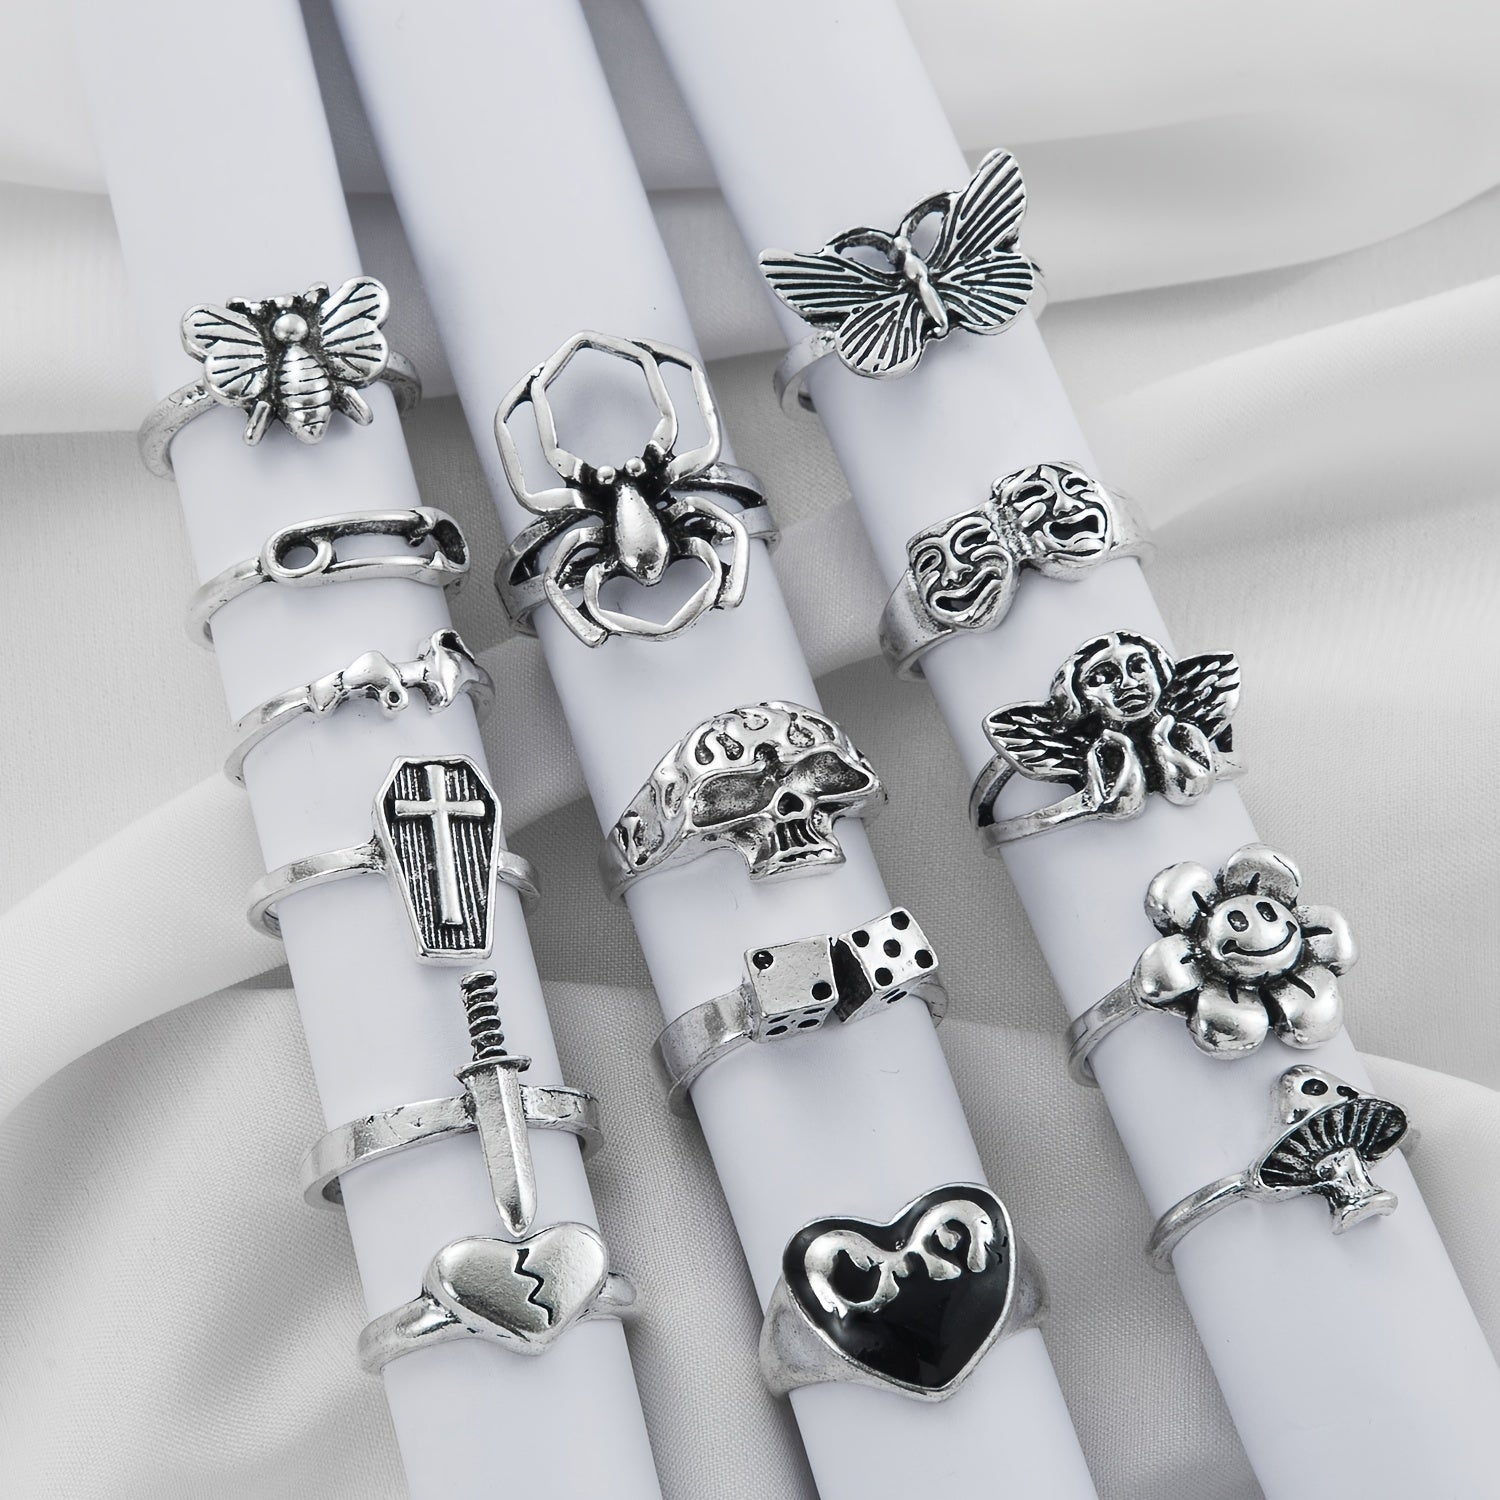 Complete Your Vintage Look with 15pcs of Silver Plated Heart Shaped Flower Skull Butterfly Spider Stacking Rings in Assorted Sizes